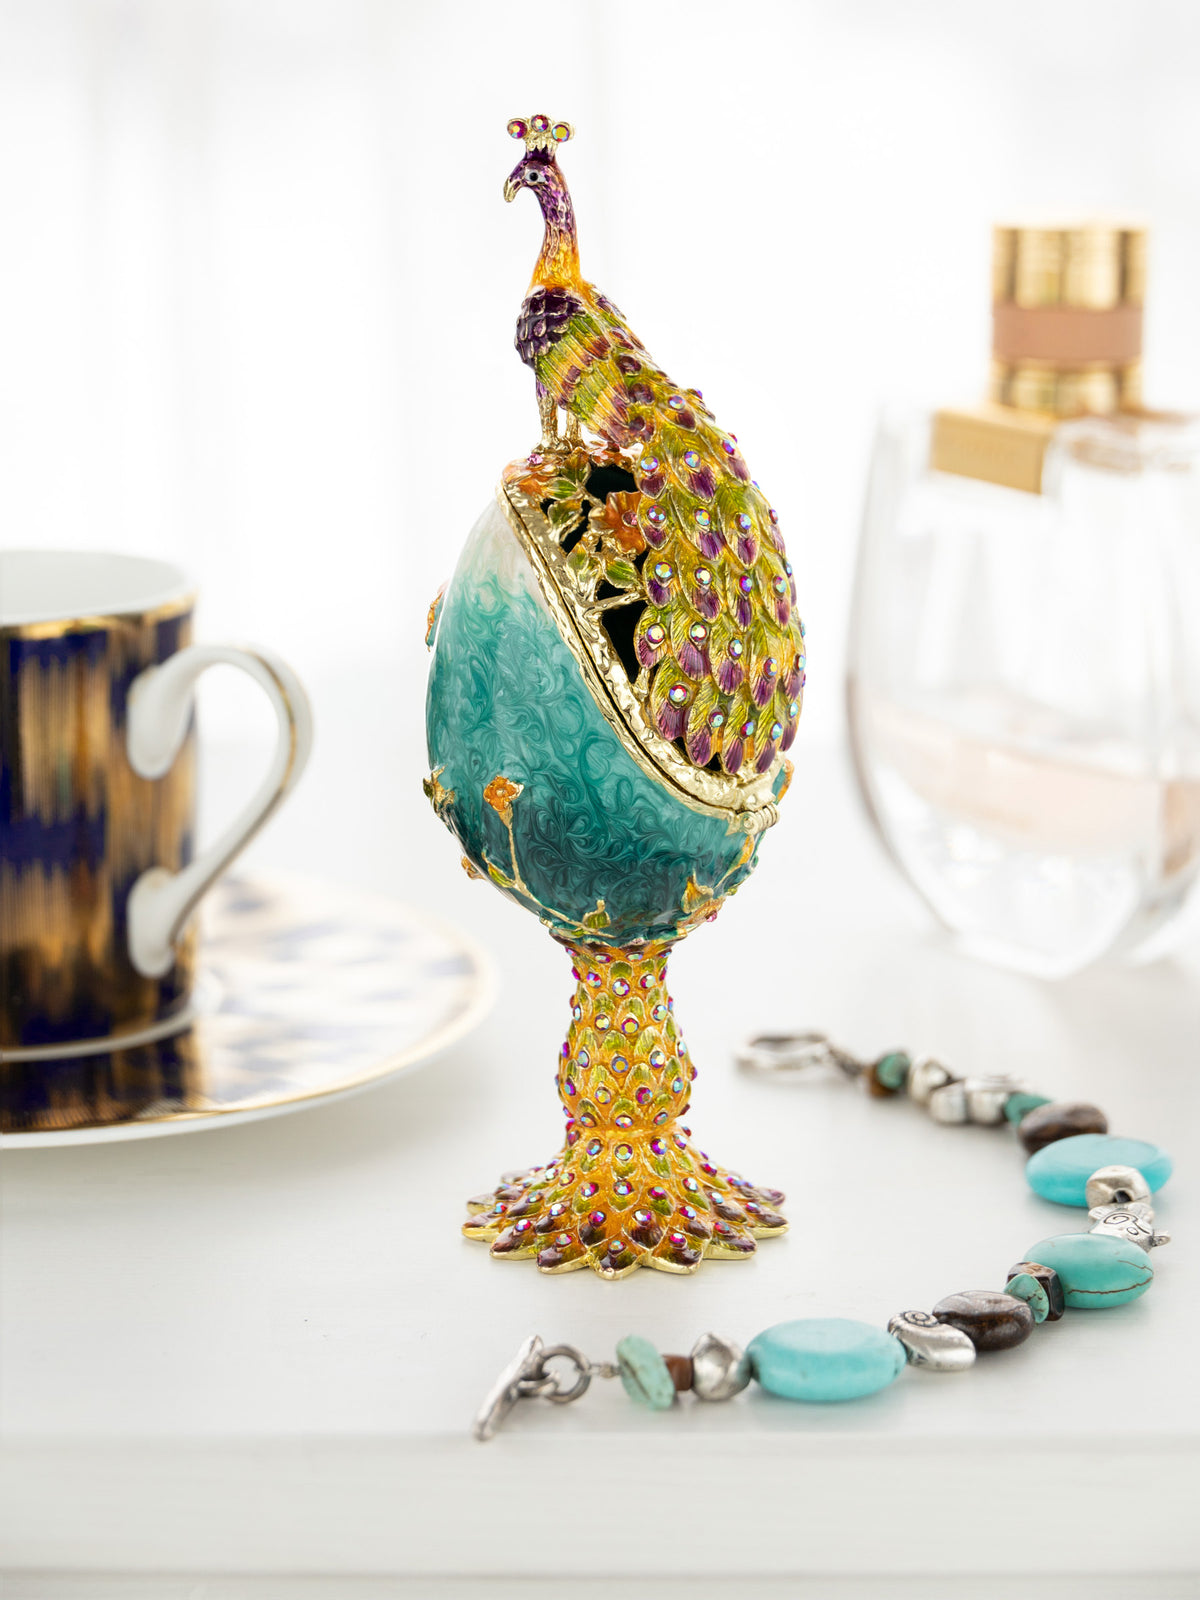 Peacock on a Faberge Egg